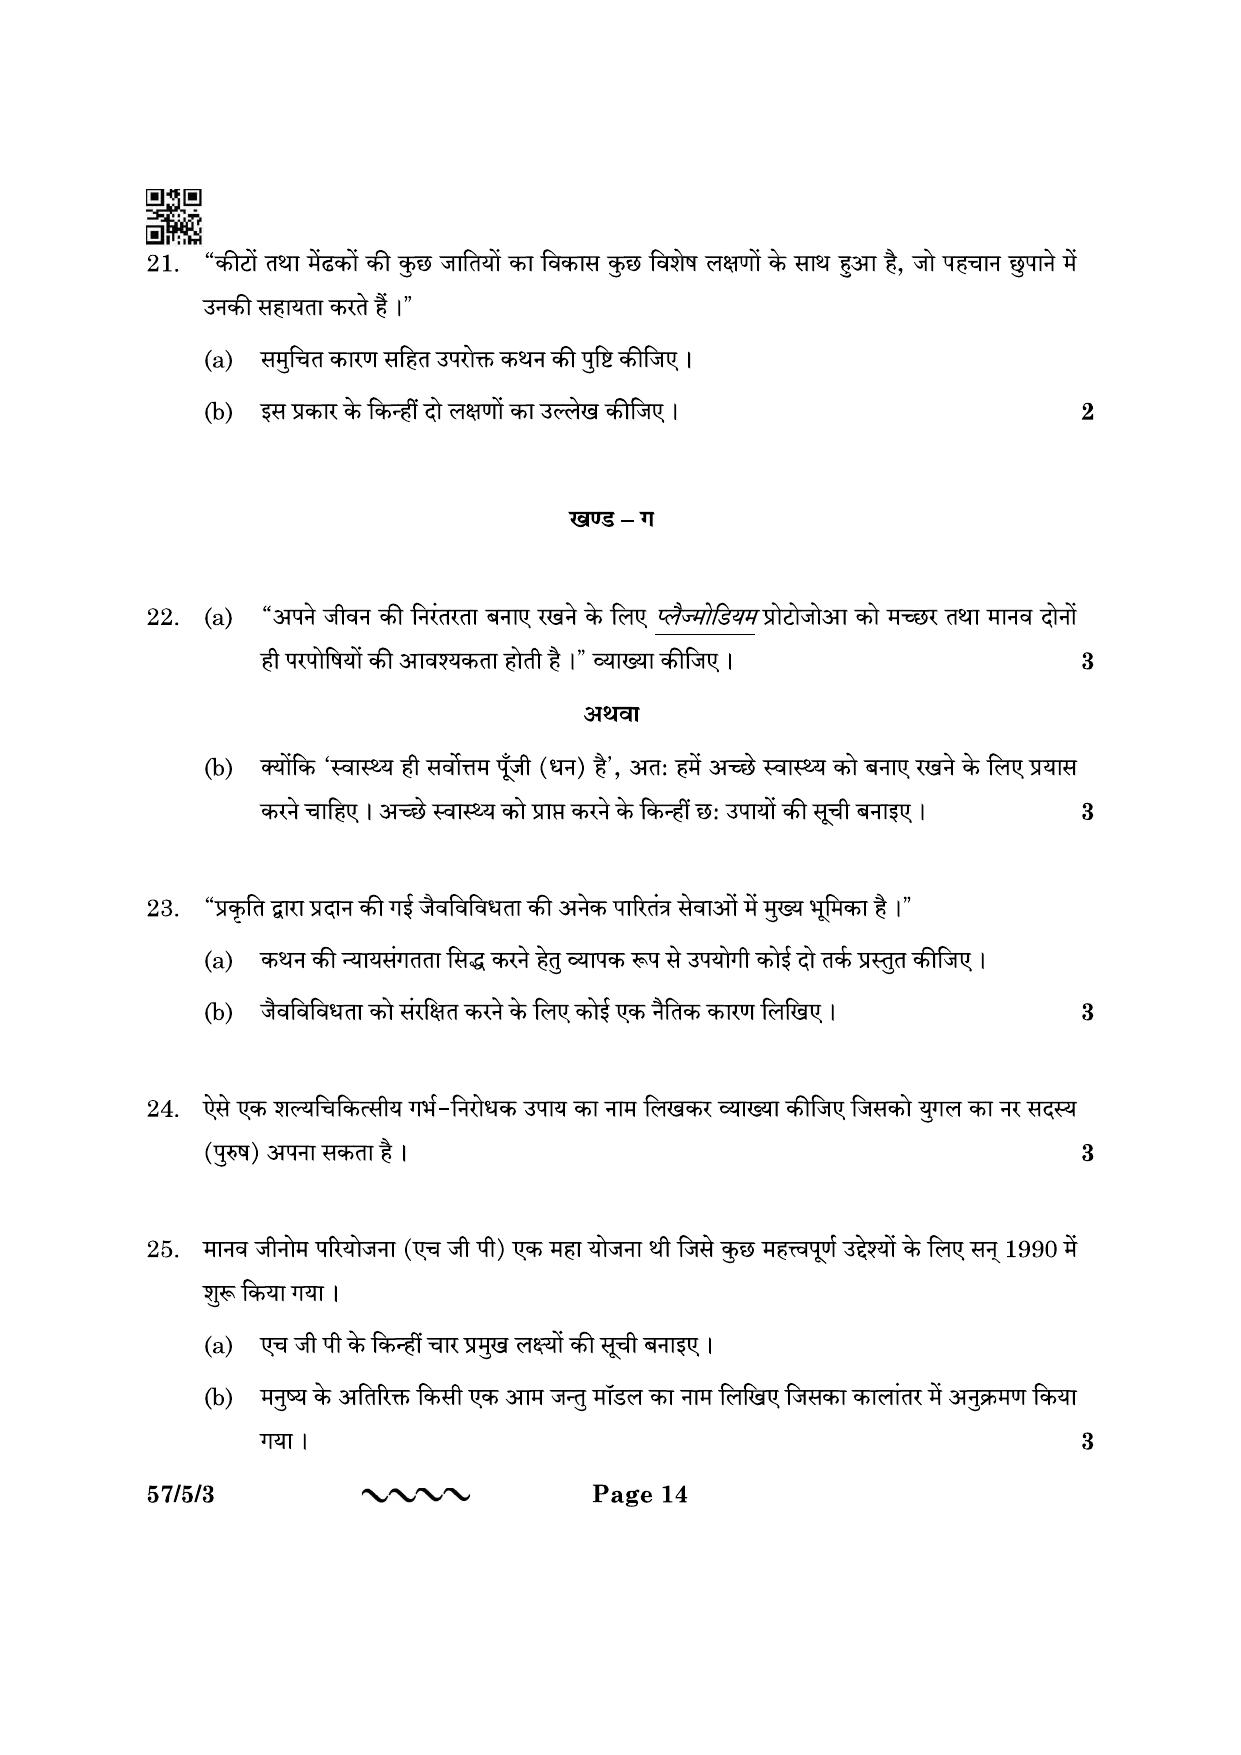 CBSE Class 12 57-5-3 Biology 2023 Question Paper - Page 14